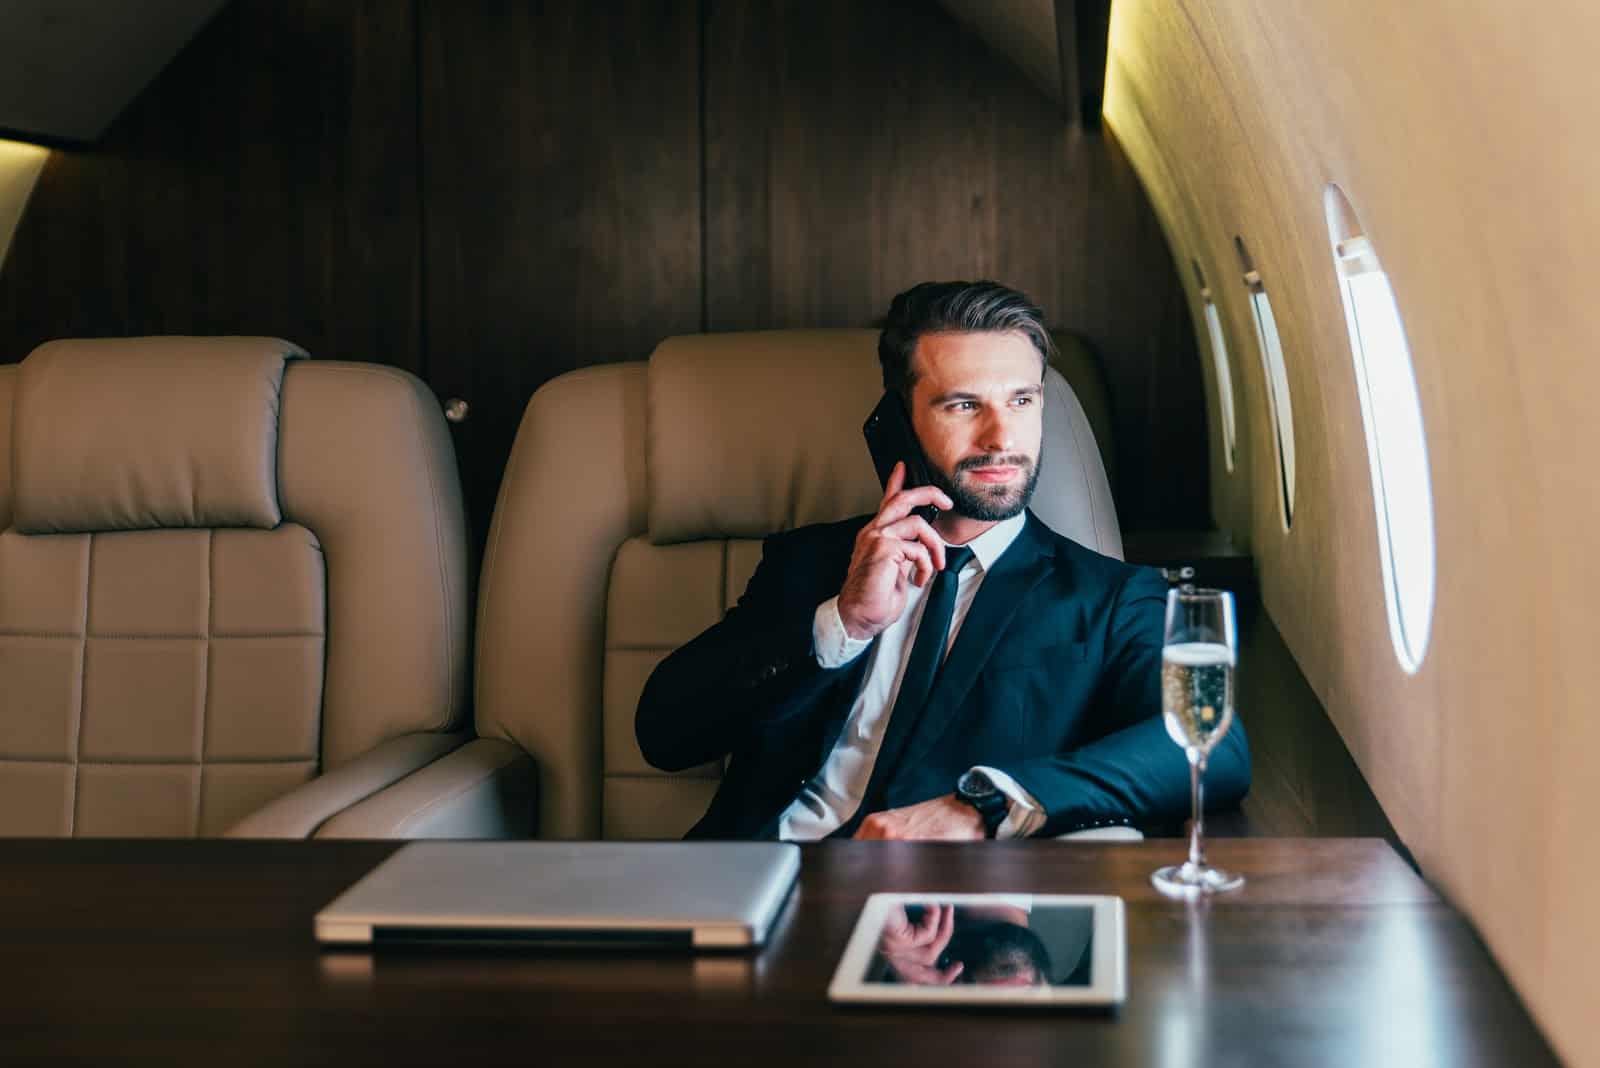 What is a chartered flight: A man in suit drinks champagne and flies on a private jet